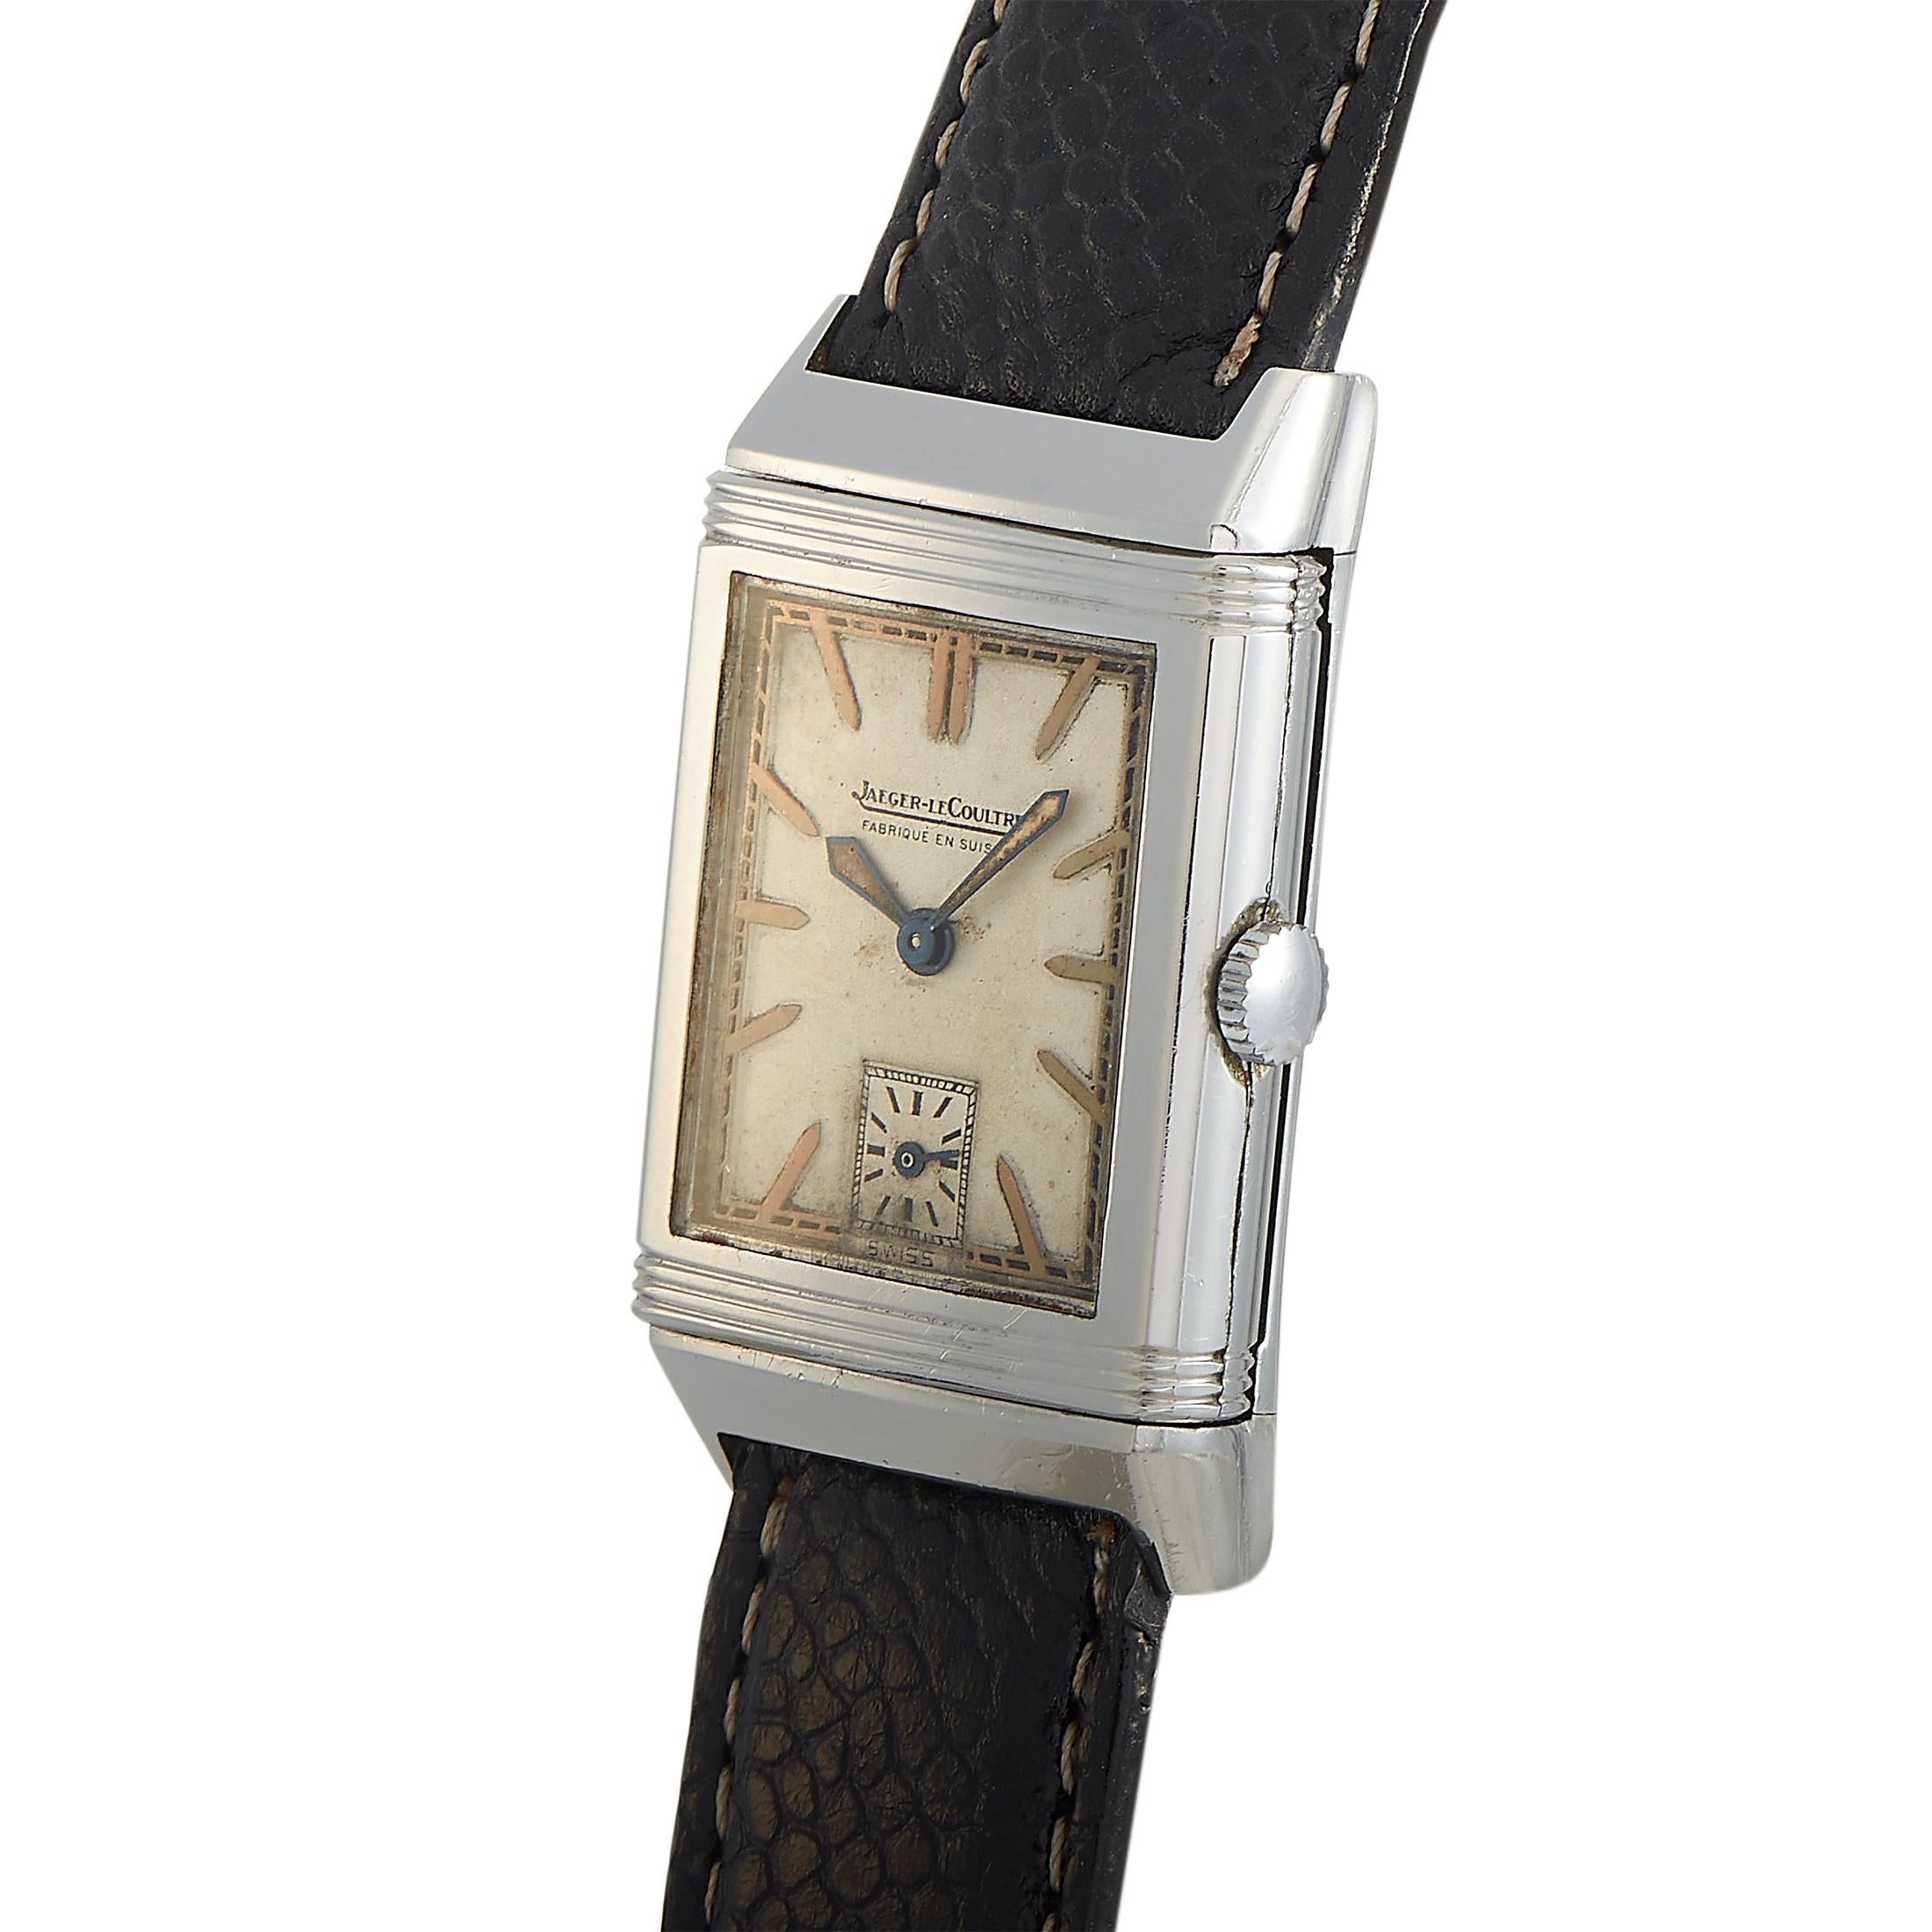 The Jaeger-LeCoultre Reverso was created in 1931 to withstand polo matches, by reversing the case to reveal a back that fully protects the face of the watch. 

This vintage Reverso timepiece from c. 1940 is presented with a stainless steel case that